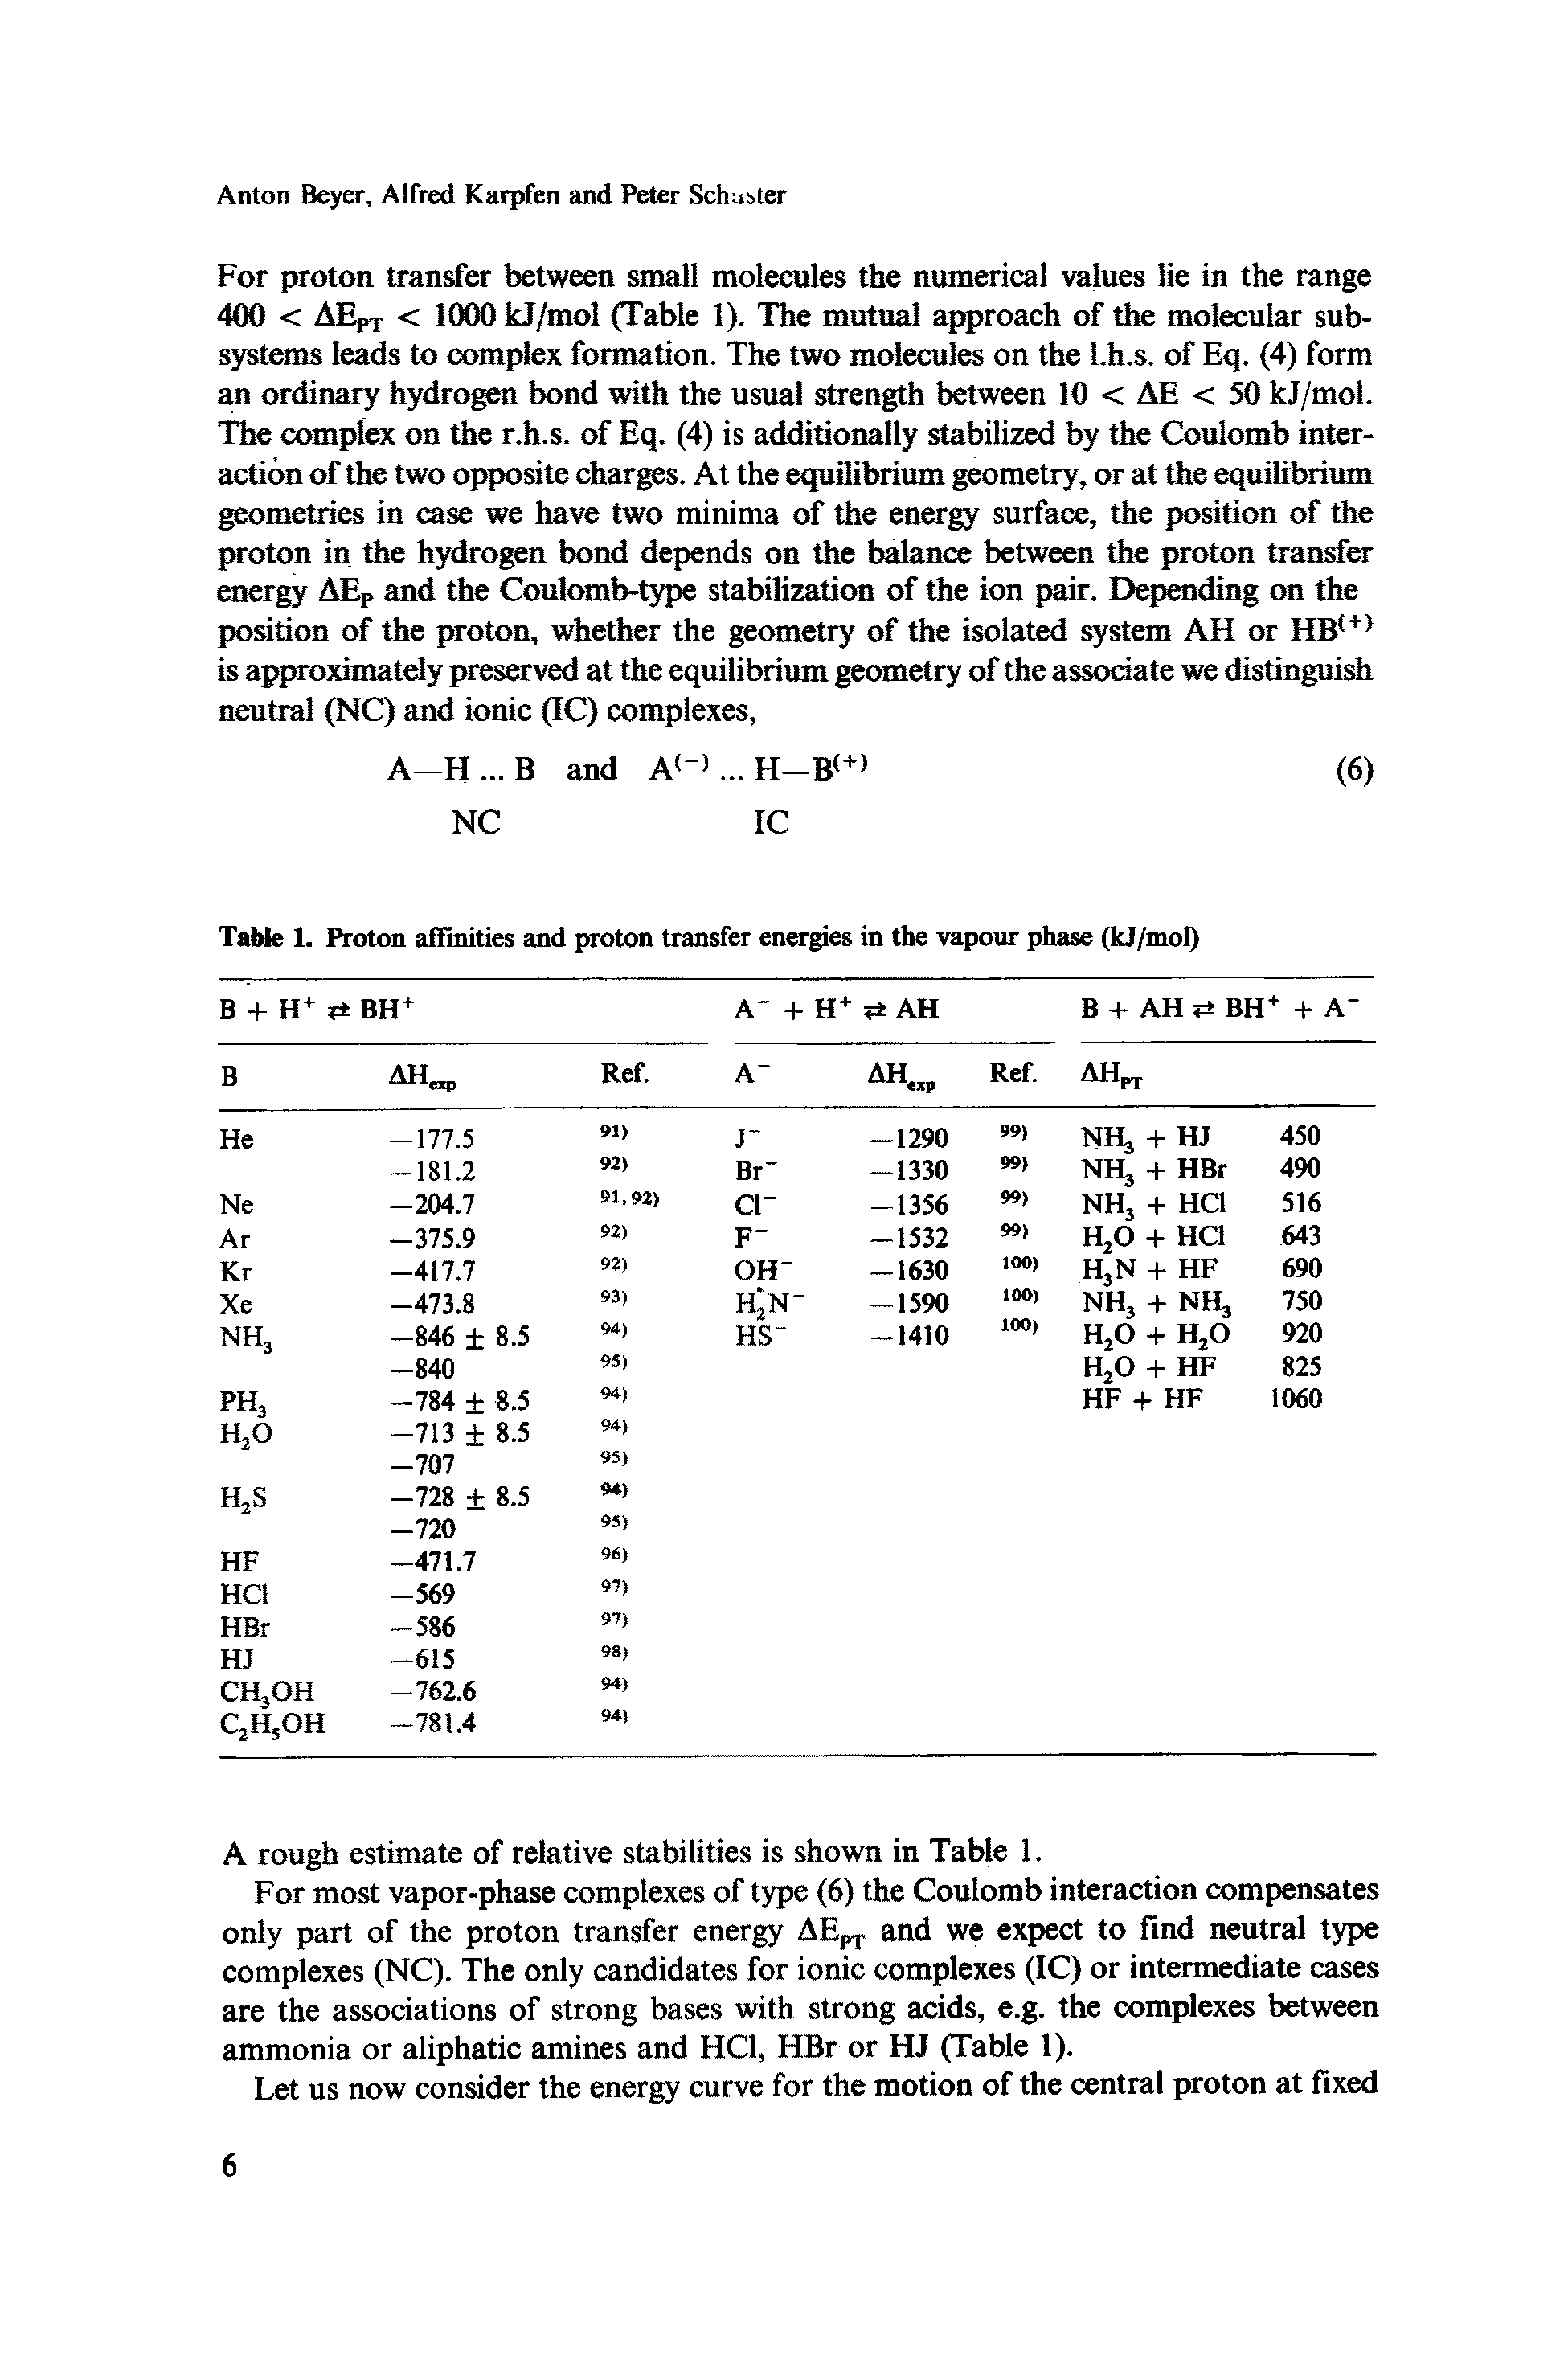 Table 1. Proton affinities and proton transfer energies in the vapour phase (kJ/mol)...